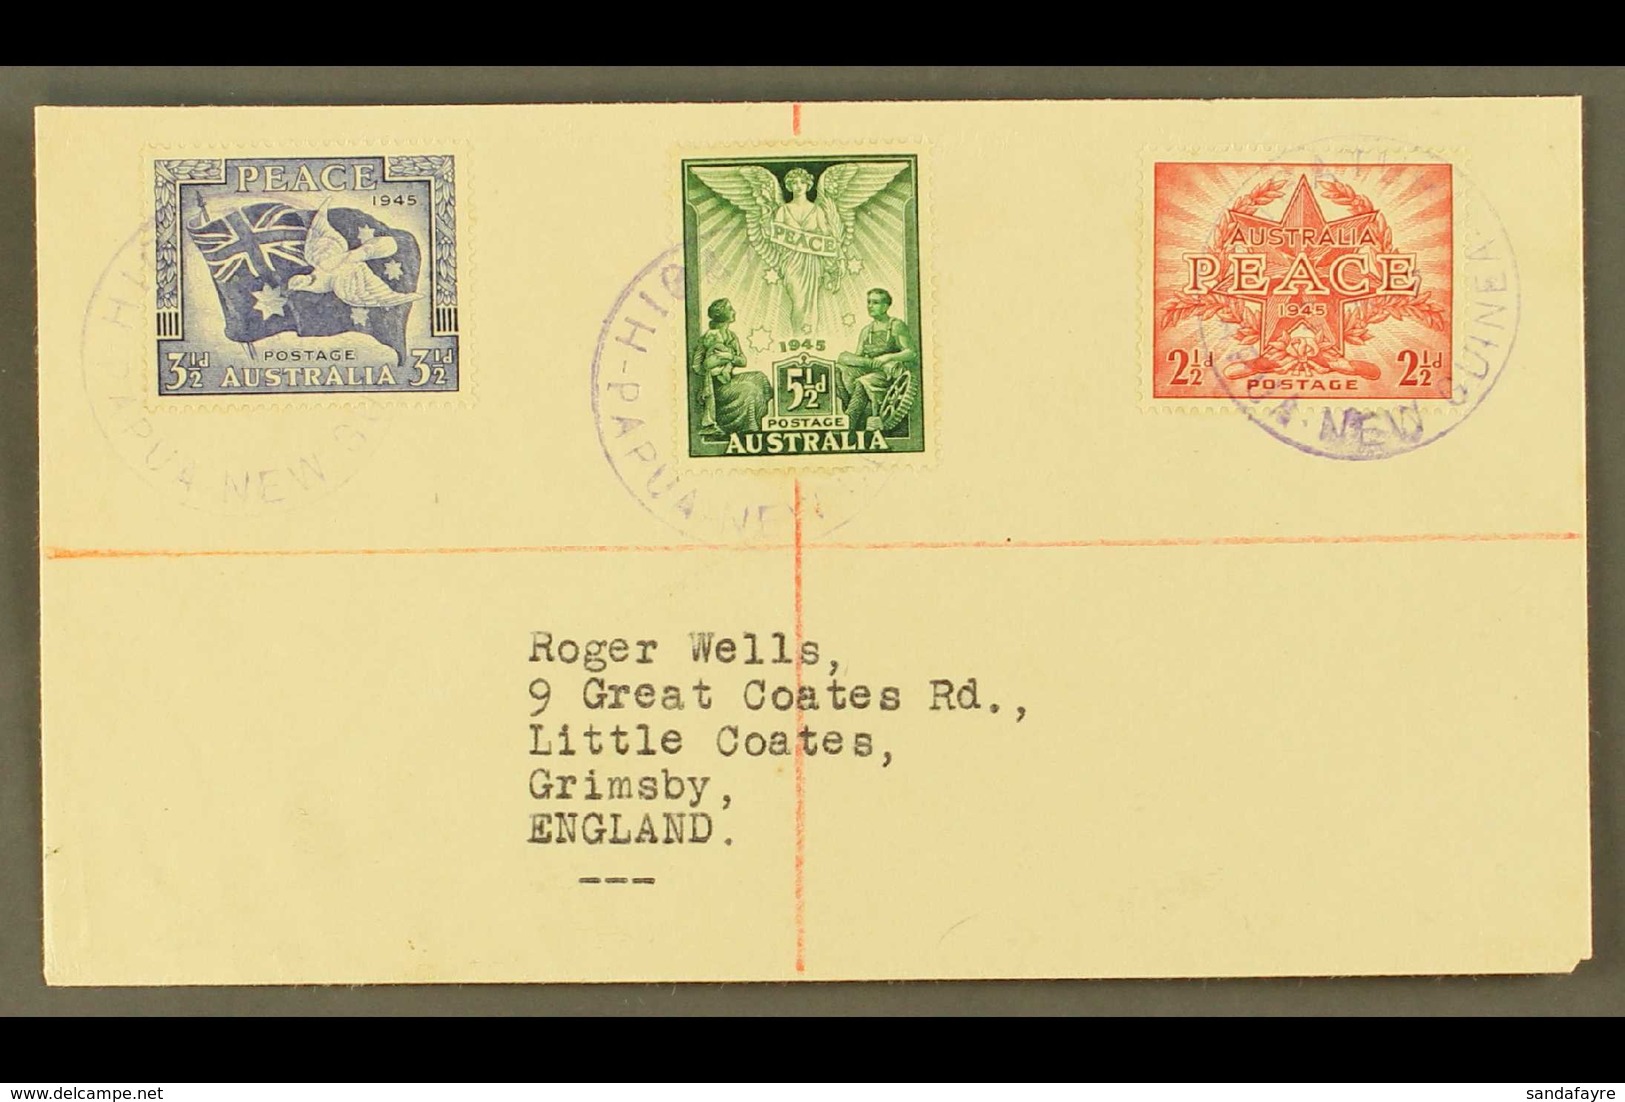 1947 Neat "Roger Wells" Envelope To England, Bearing Australia Peace Set, Tied By Fine HIGATURU Cds's In VIOLET.  For Mo - Papua New Guinea